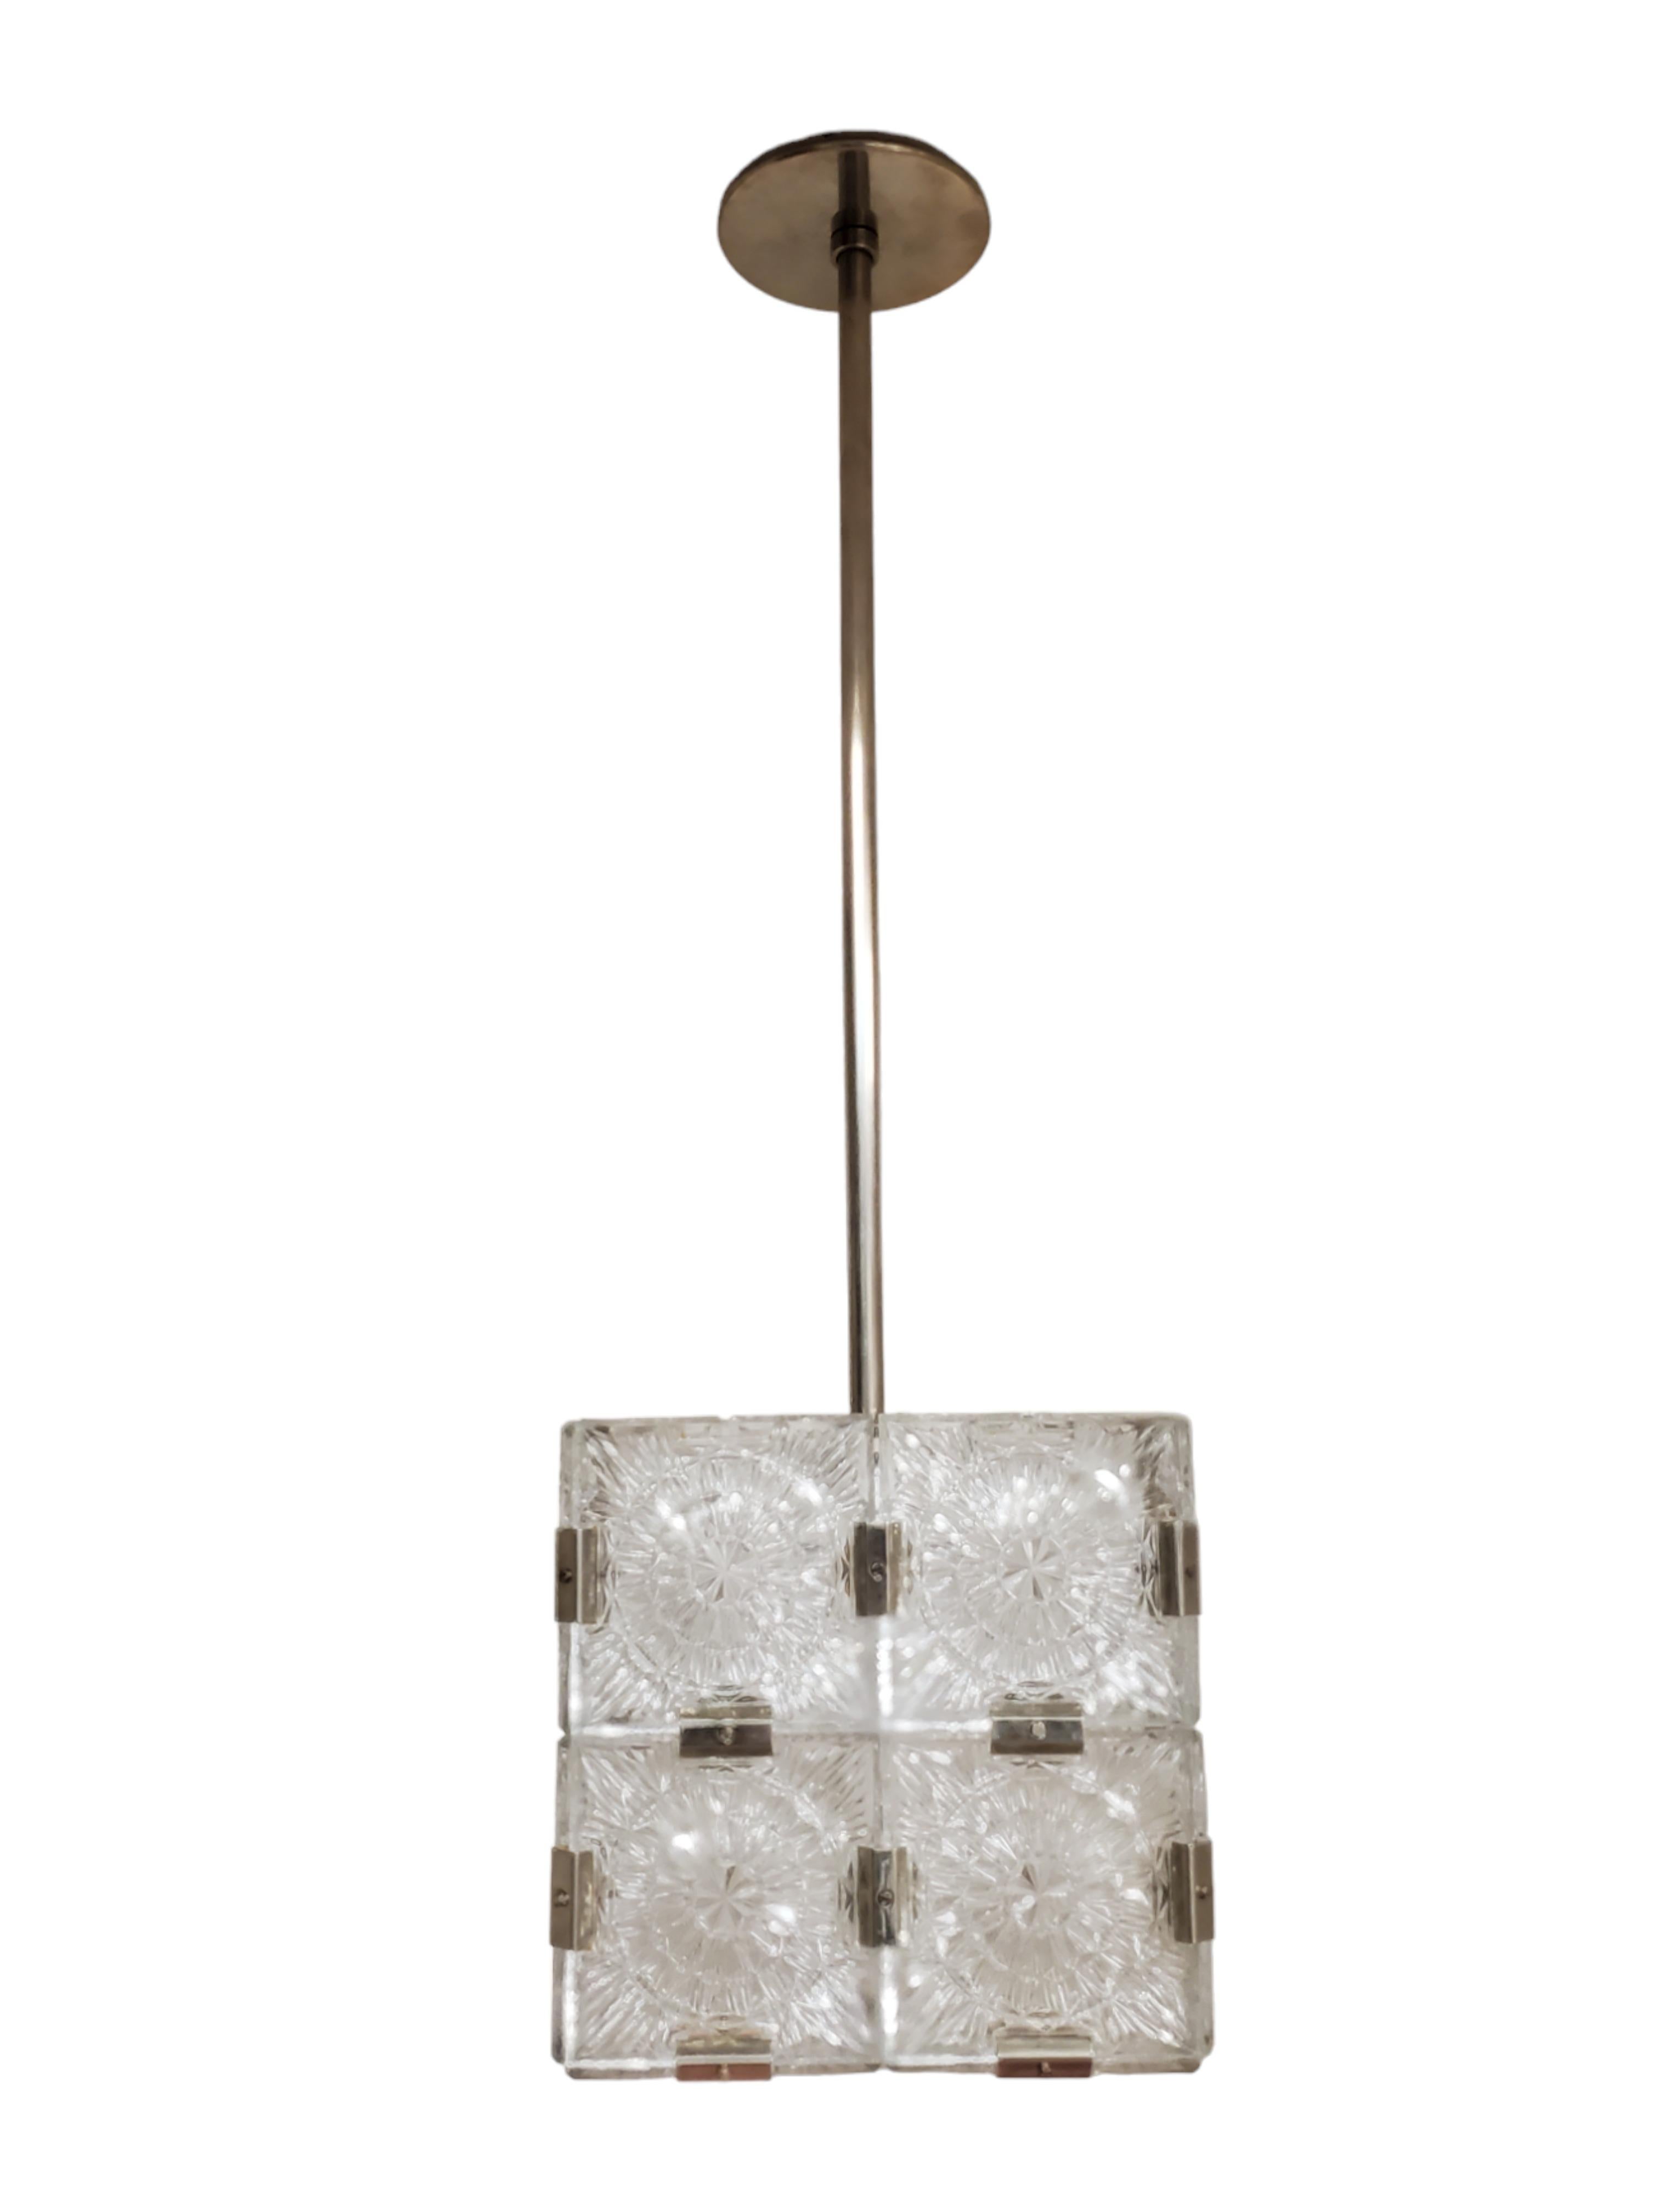 Set of Ten Original Box Cube Pendant Lights, Glass with Nickeled Clips For Sale 5